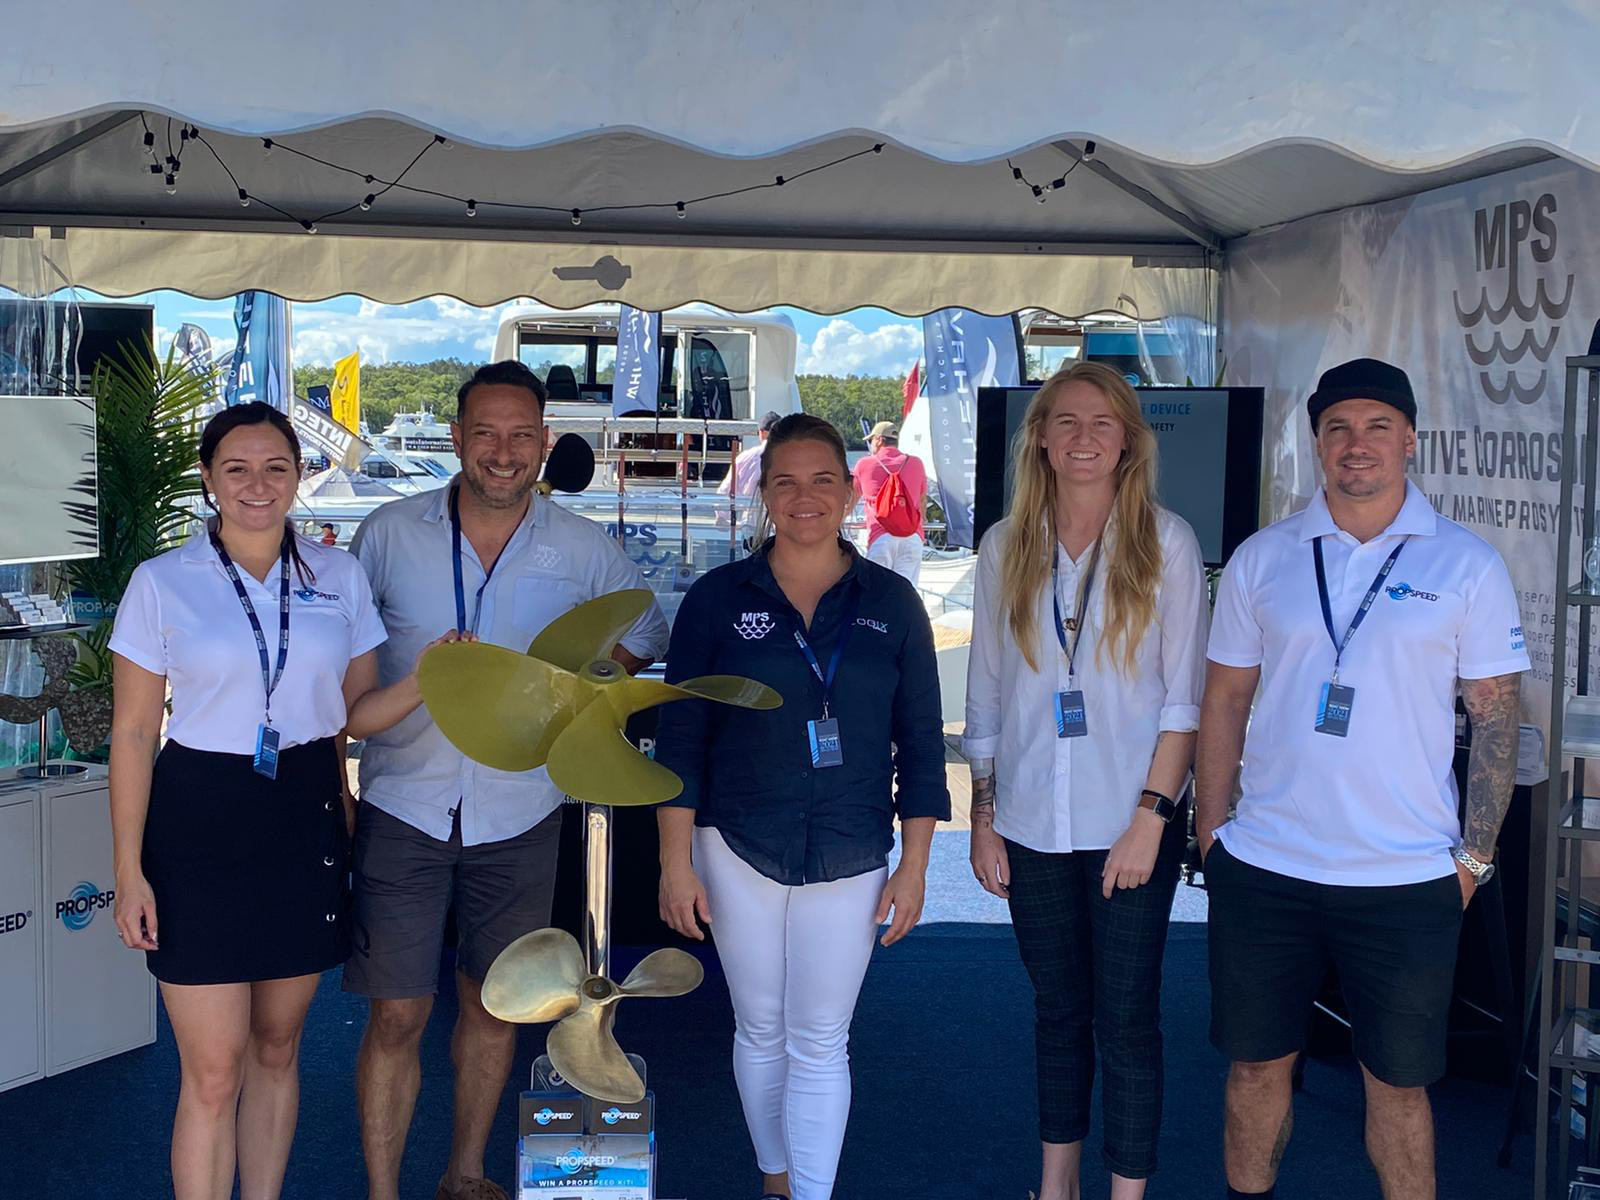 Propspeed at Sanctuary Cove International Boat Show 2021